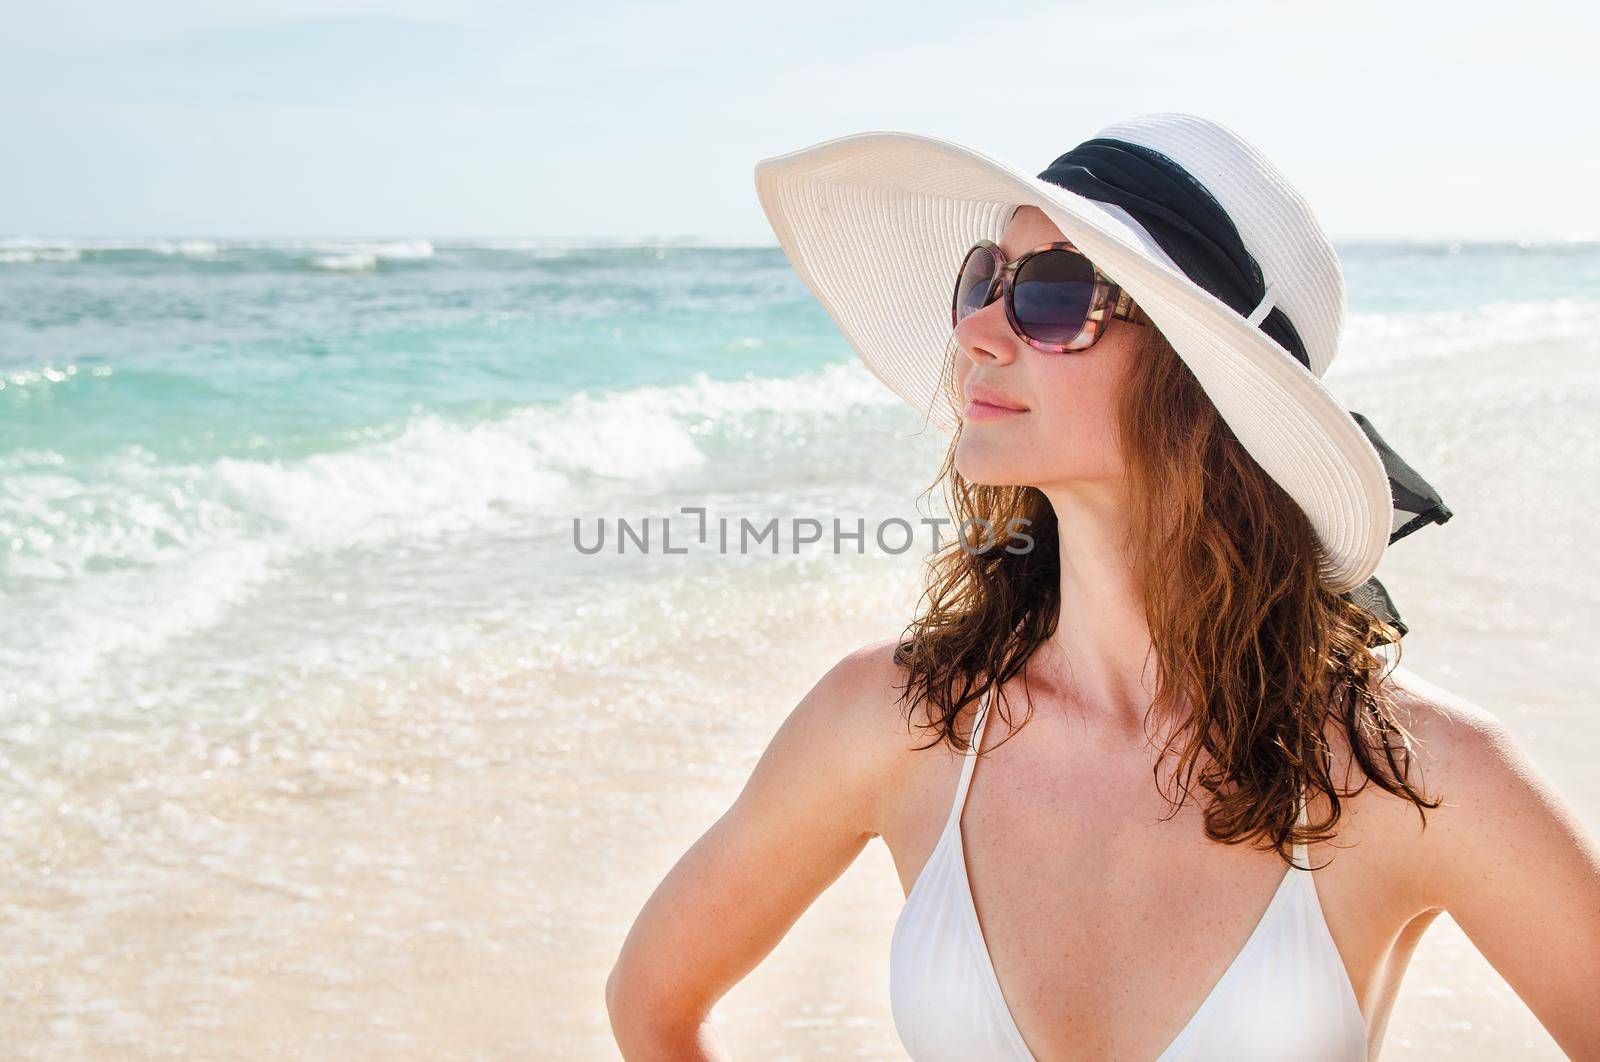 Young woman in a hat walking on the azure beach Bali. Stock image.